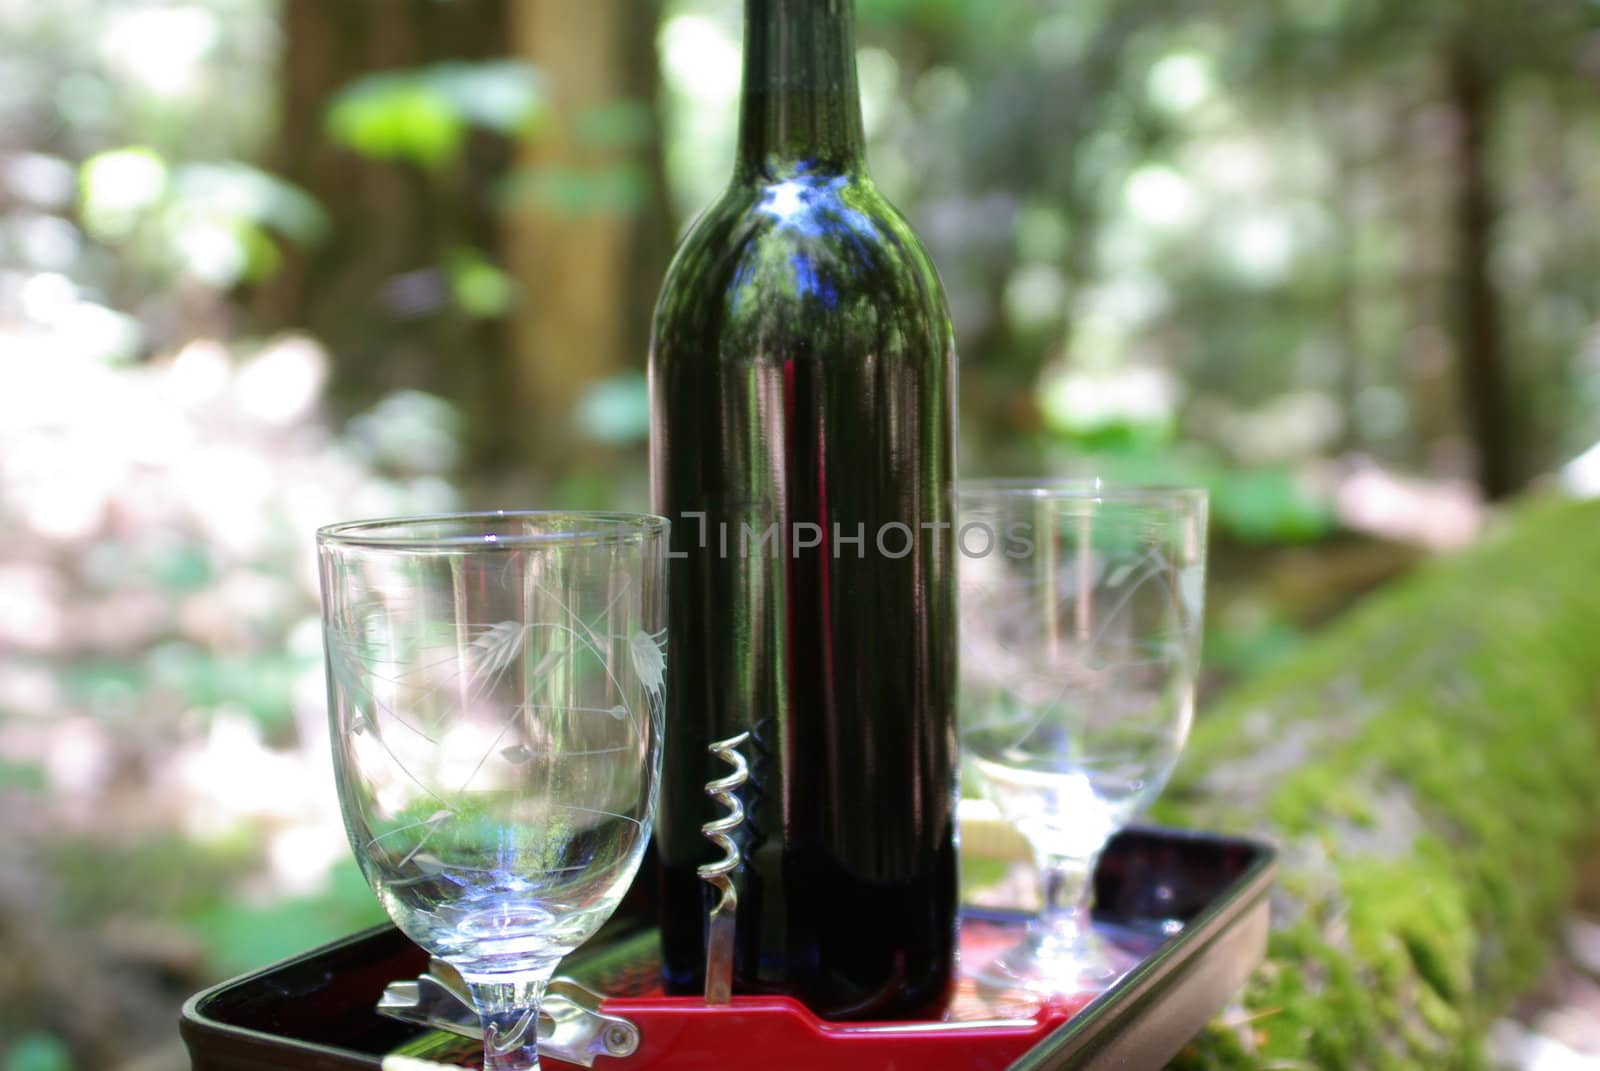 A bottle of wime, glasses and cork screw on a tray in a shallow depth of field.